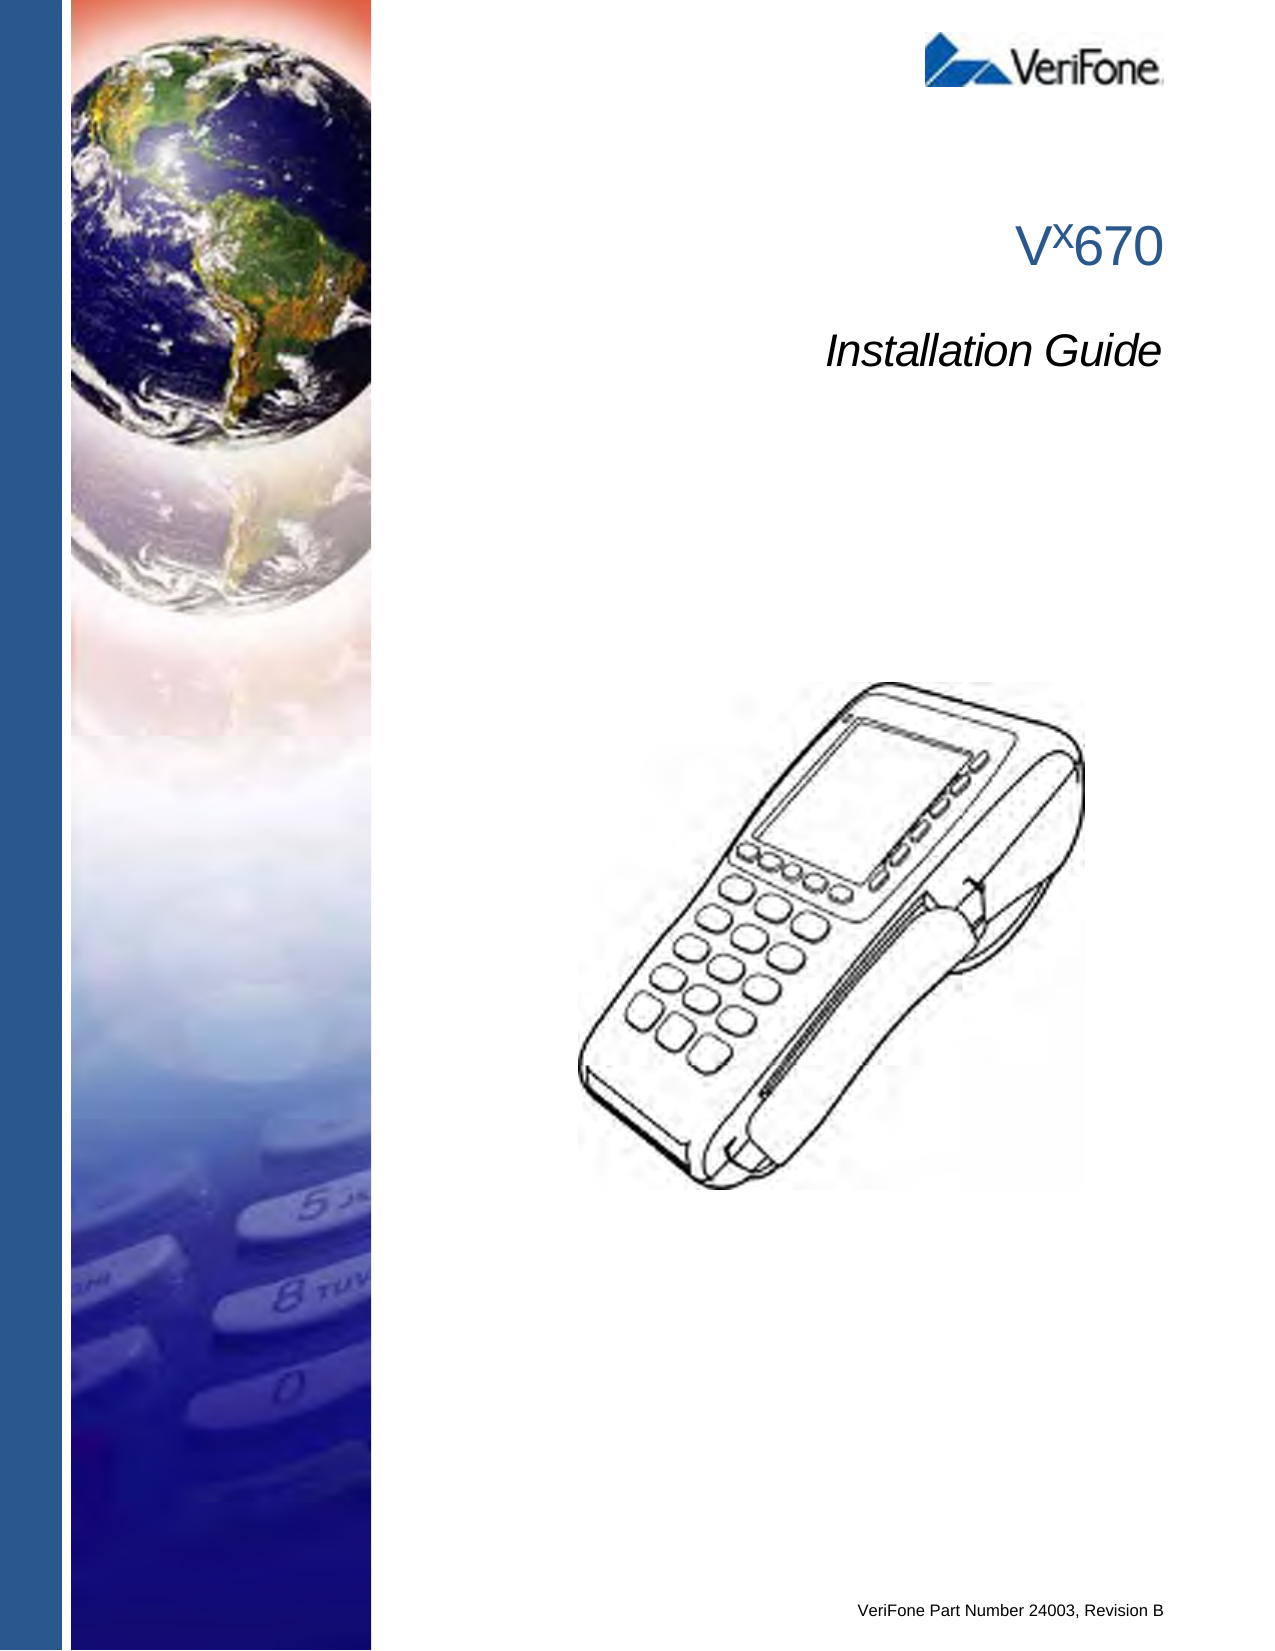 VeriFone Part Number 24003, Revision BVx670Installation Guide